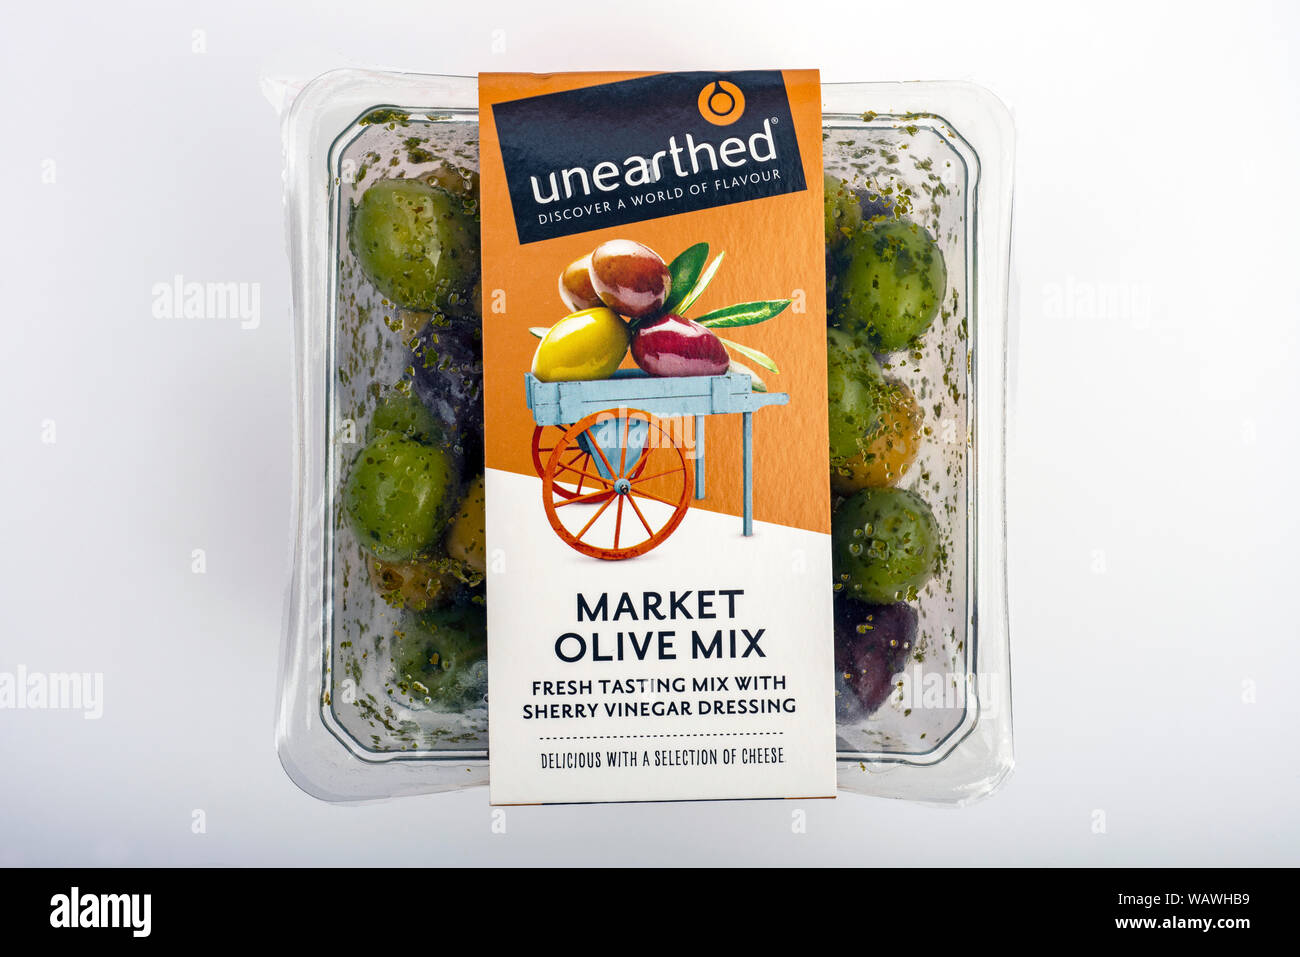 Unearthed Market Olive Mix Stock Photo